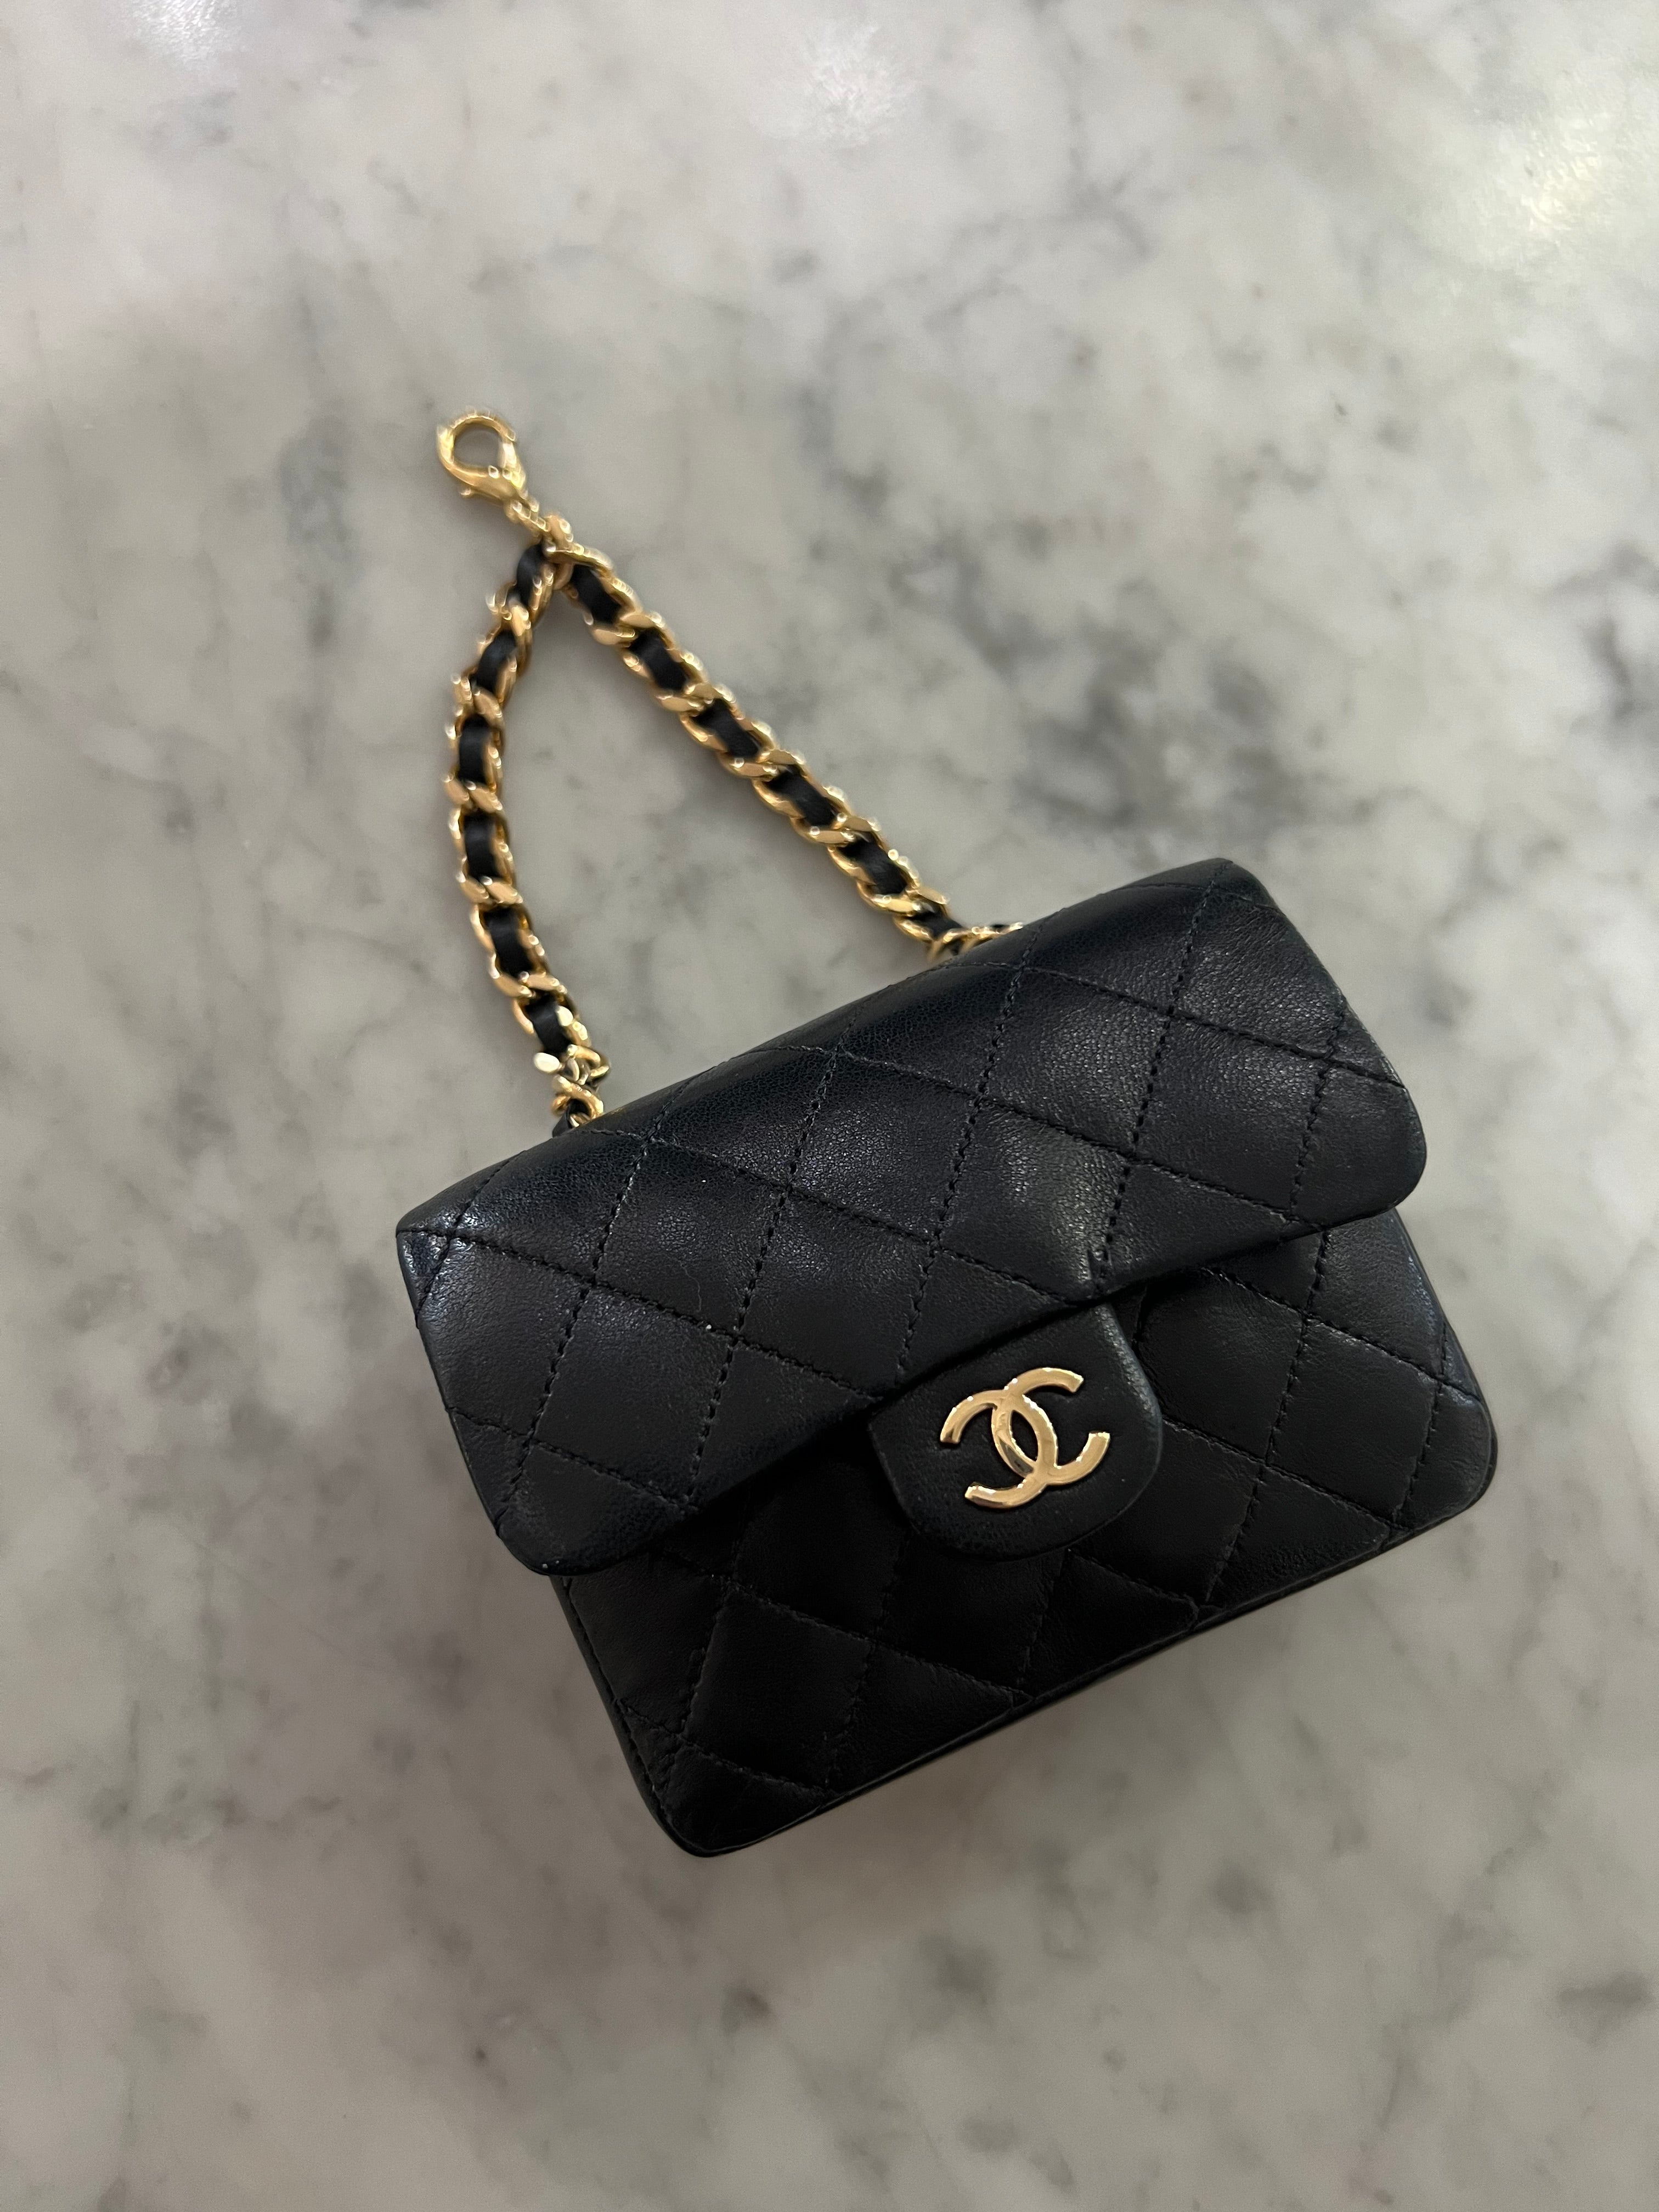 Chanel Lambskin Quilted Resin Bi-Color Waist Bag – Now You Glow